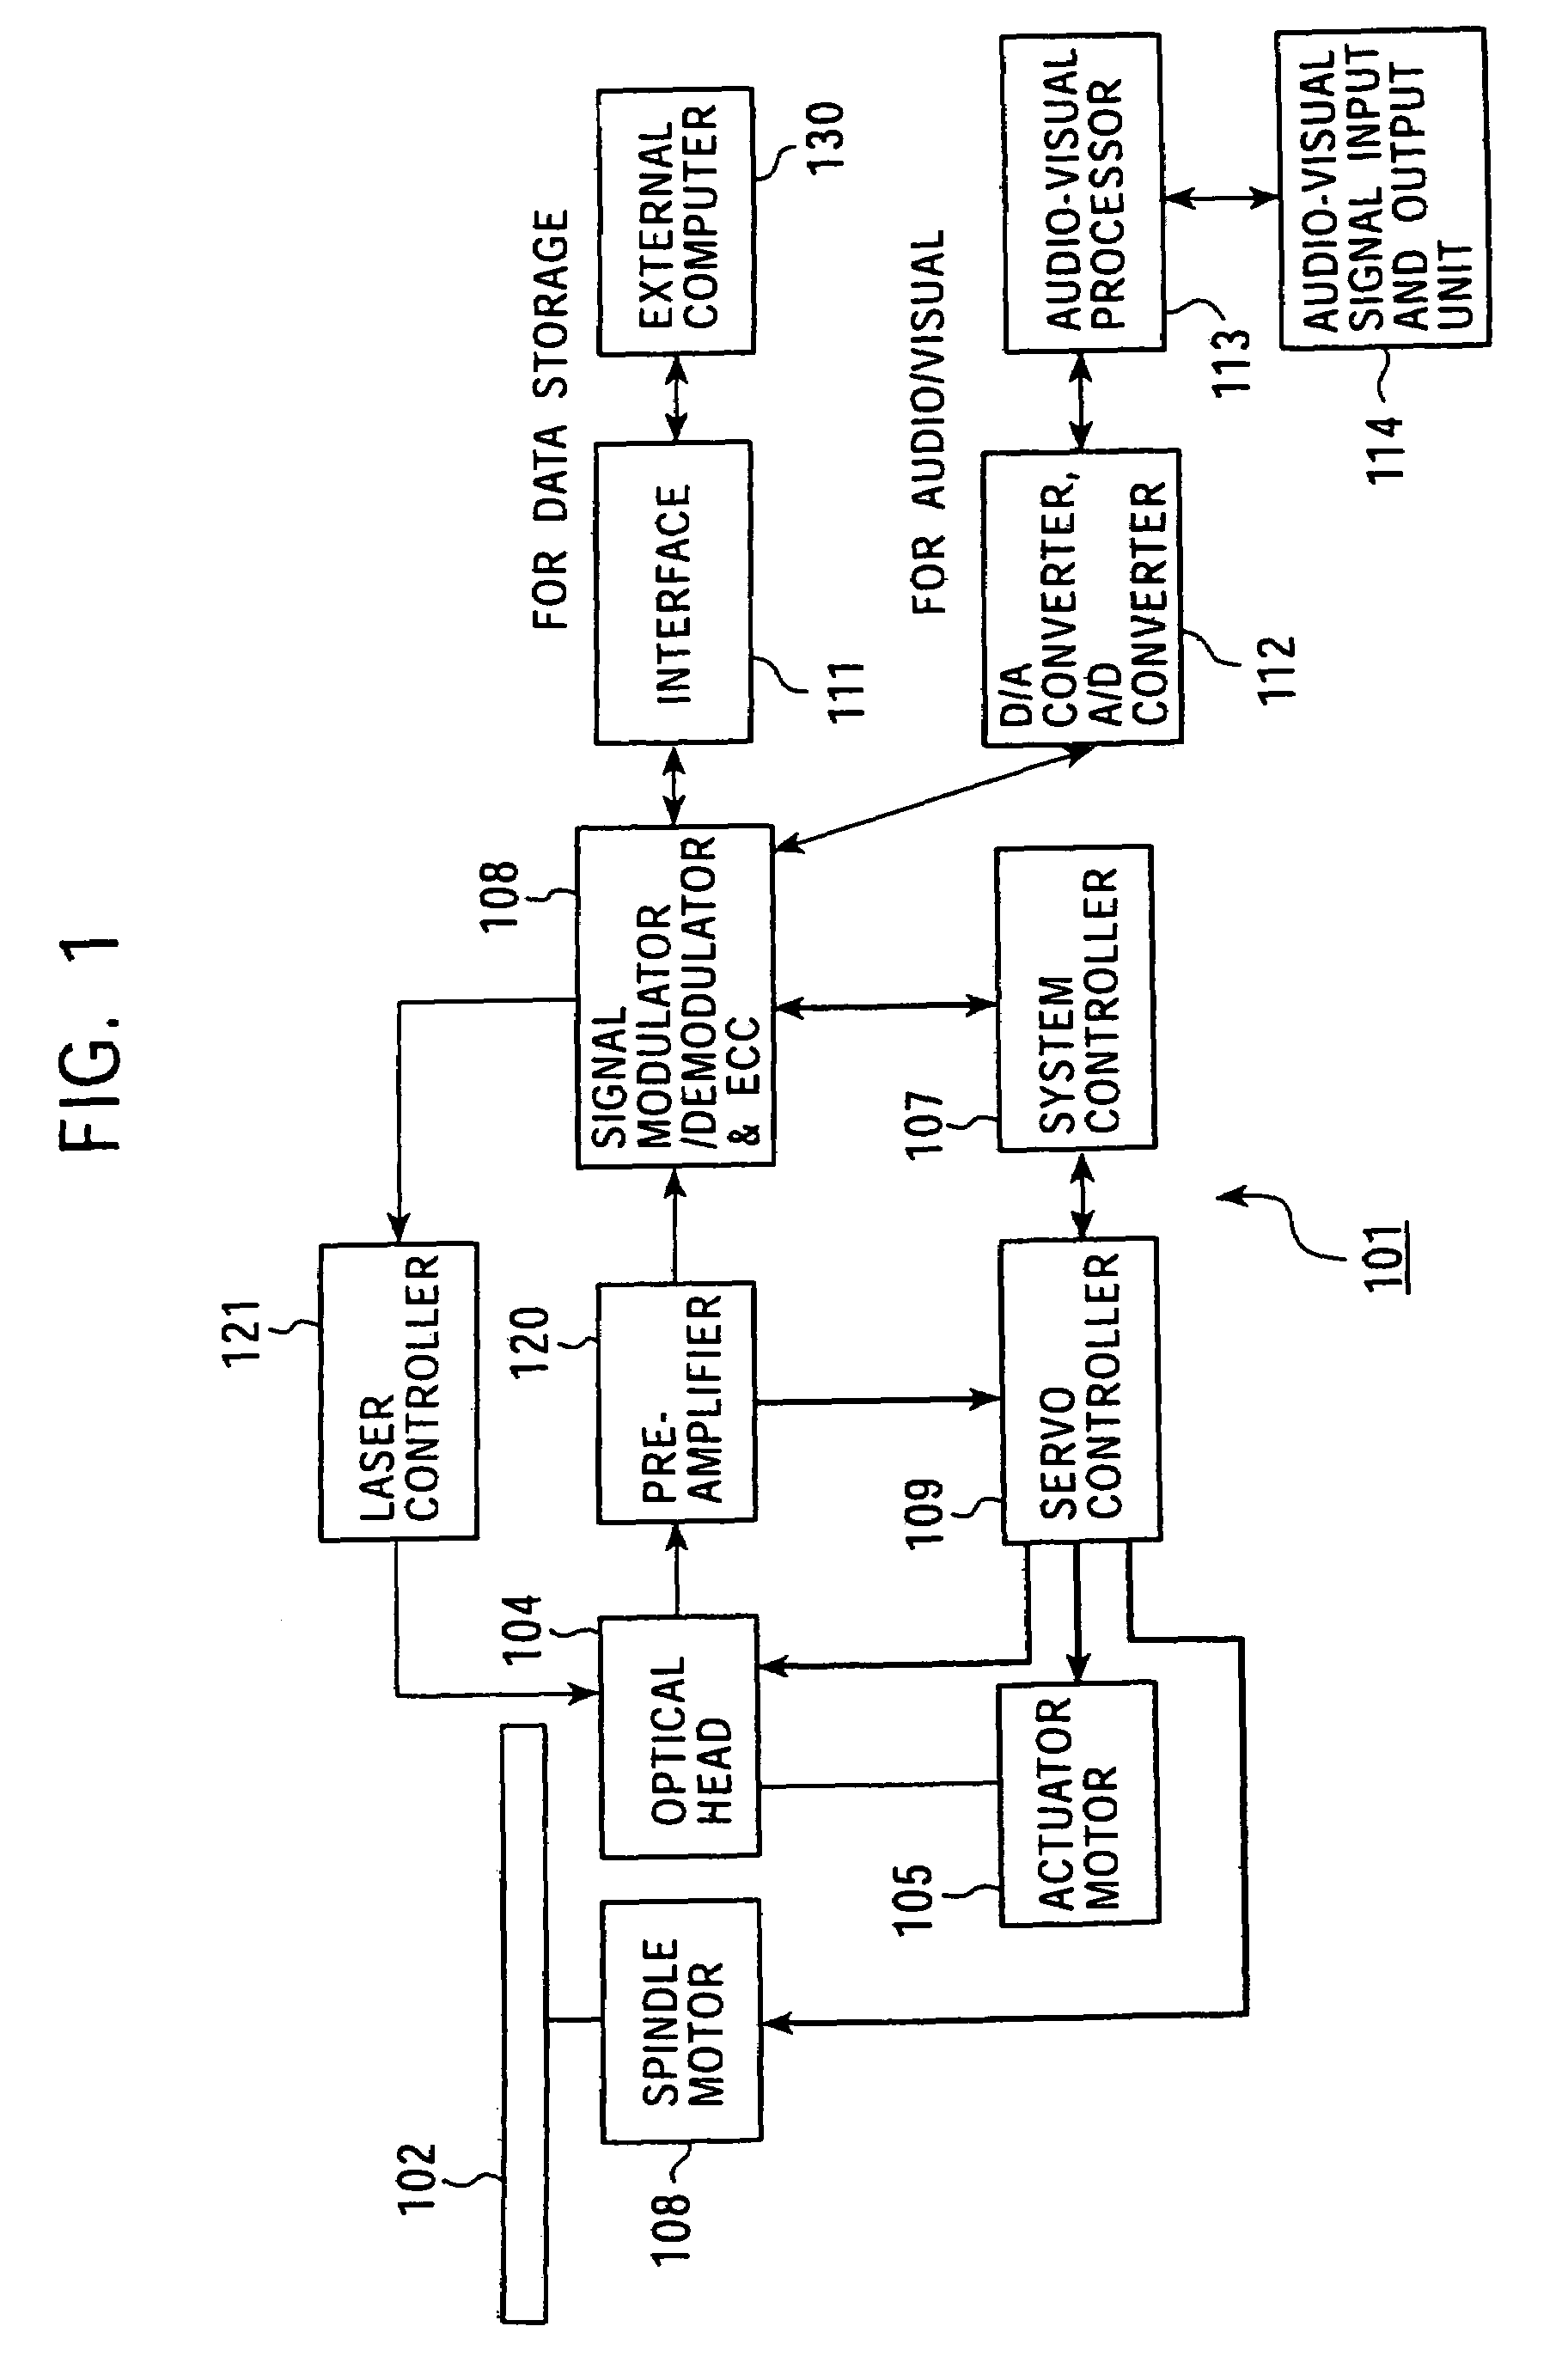 Recording and playback apparatus and optical head including a variable optical coupling efficiency device